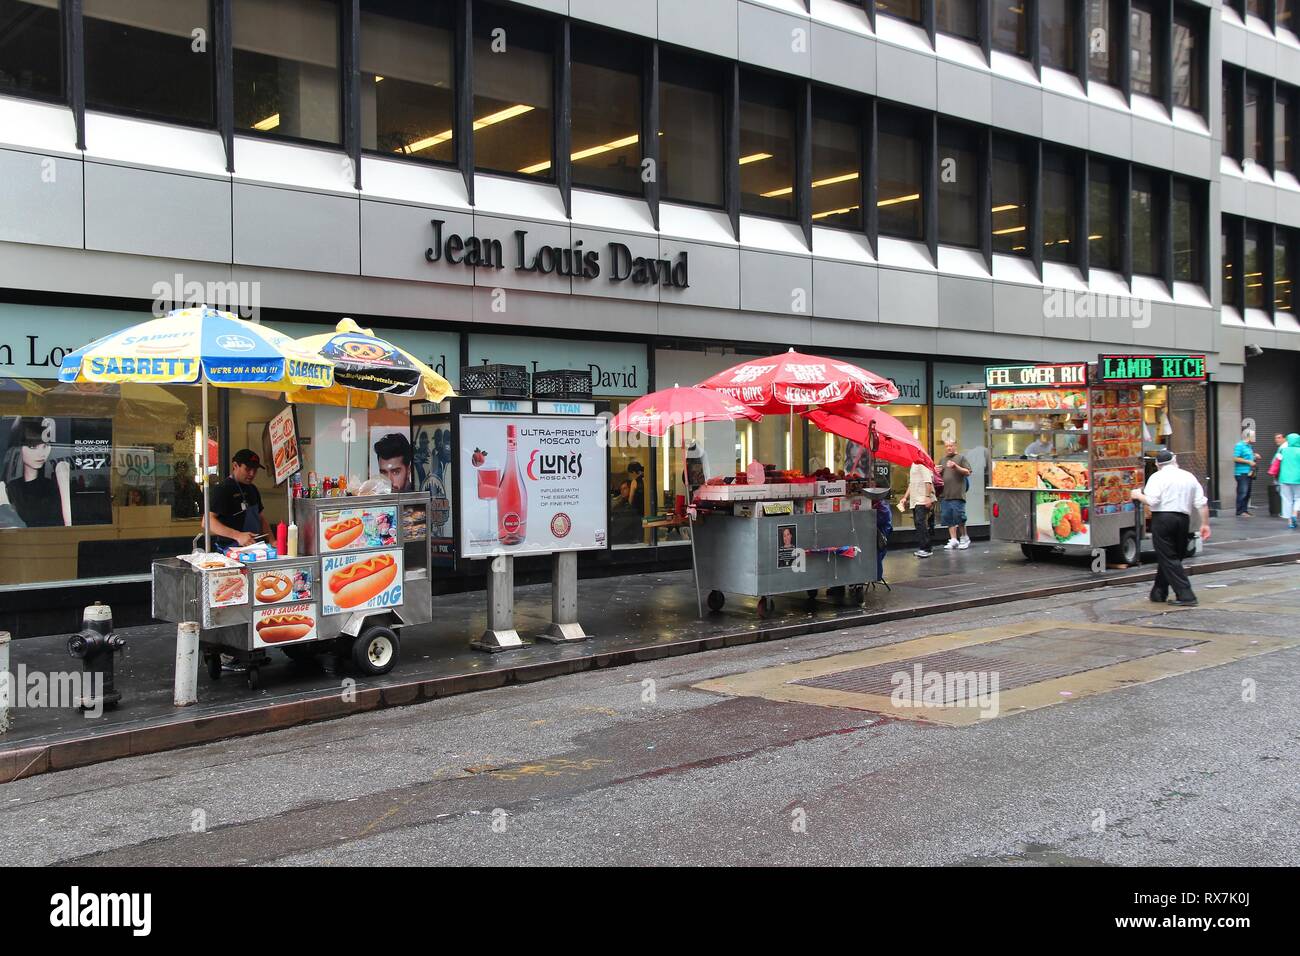 NEW YORK, USA - JULY 1, 2013: Vendors sell hot dogs and lamb rice in New York. It is estimated that Americans eat some 20 billion hot dogs a year (NHD Stock Photo